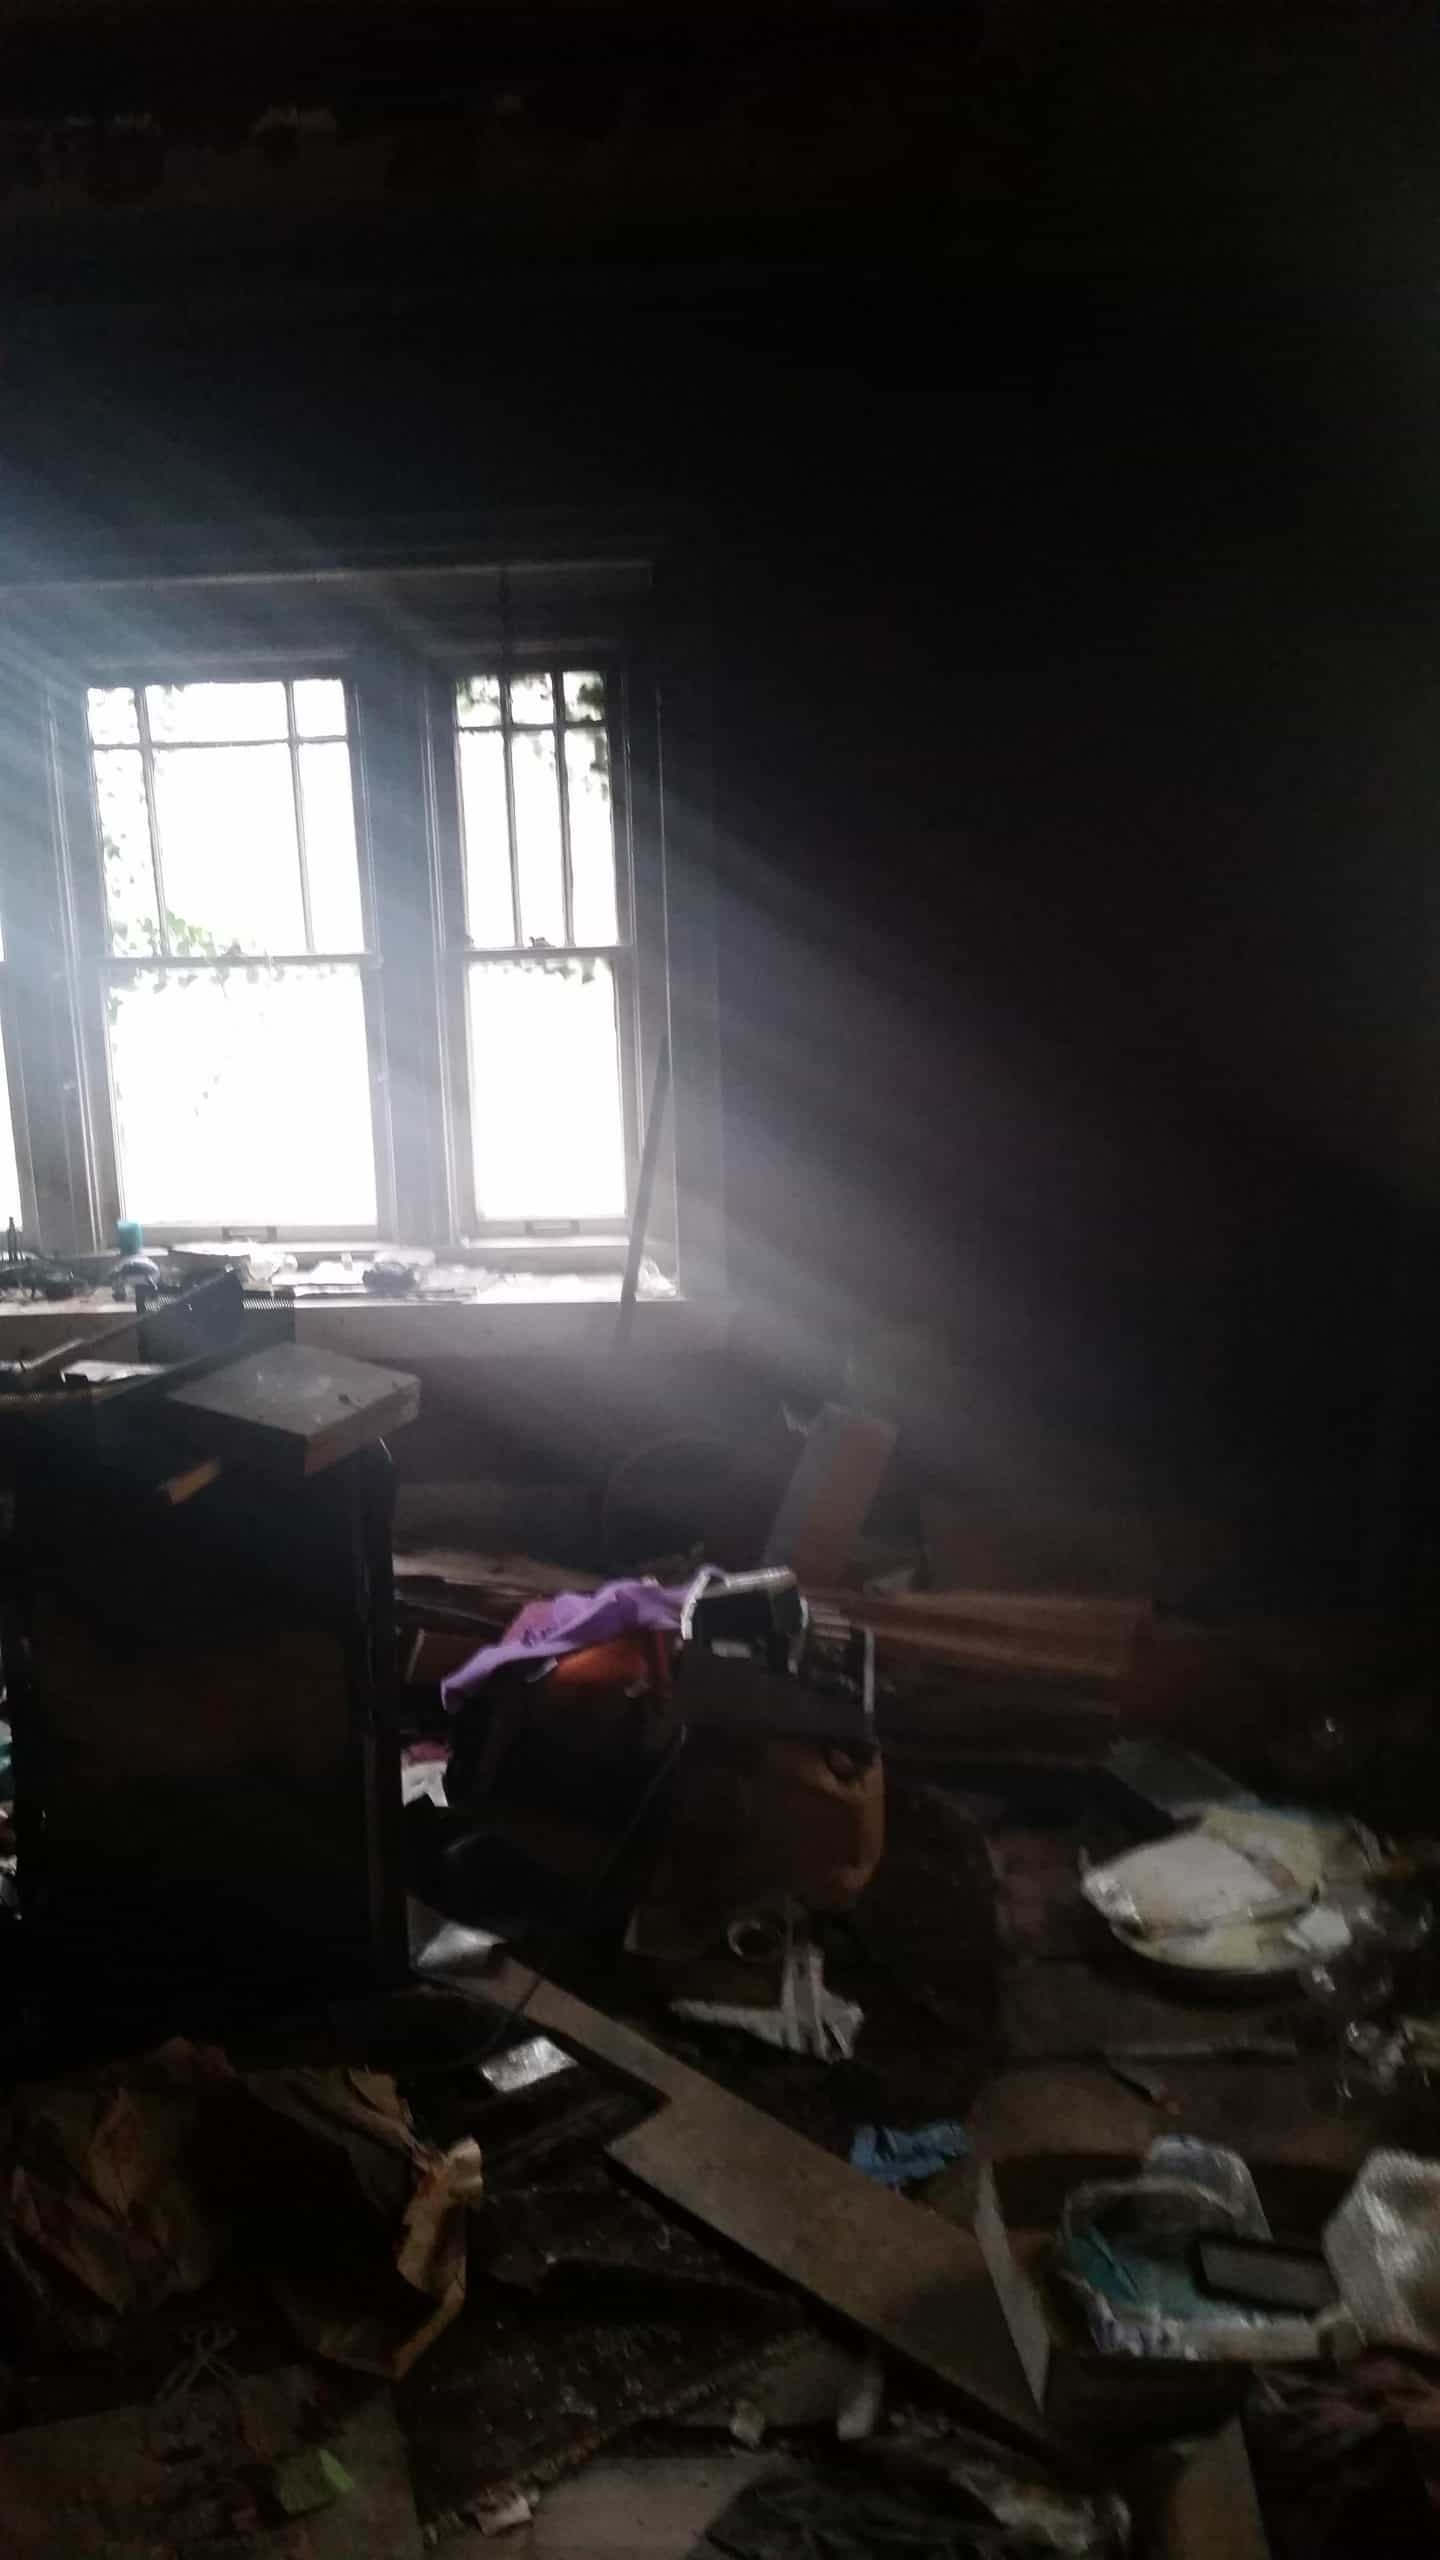 Interior of a dark house with debris piled on the floor and a window letting light in.